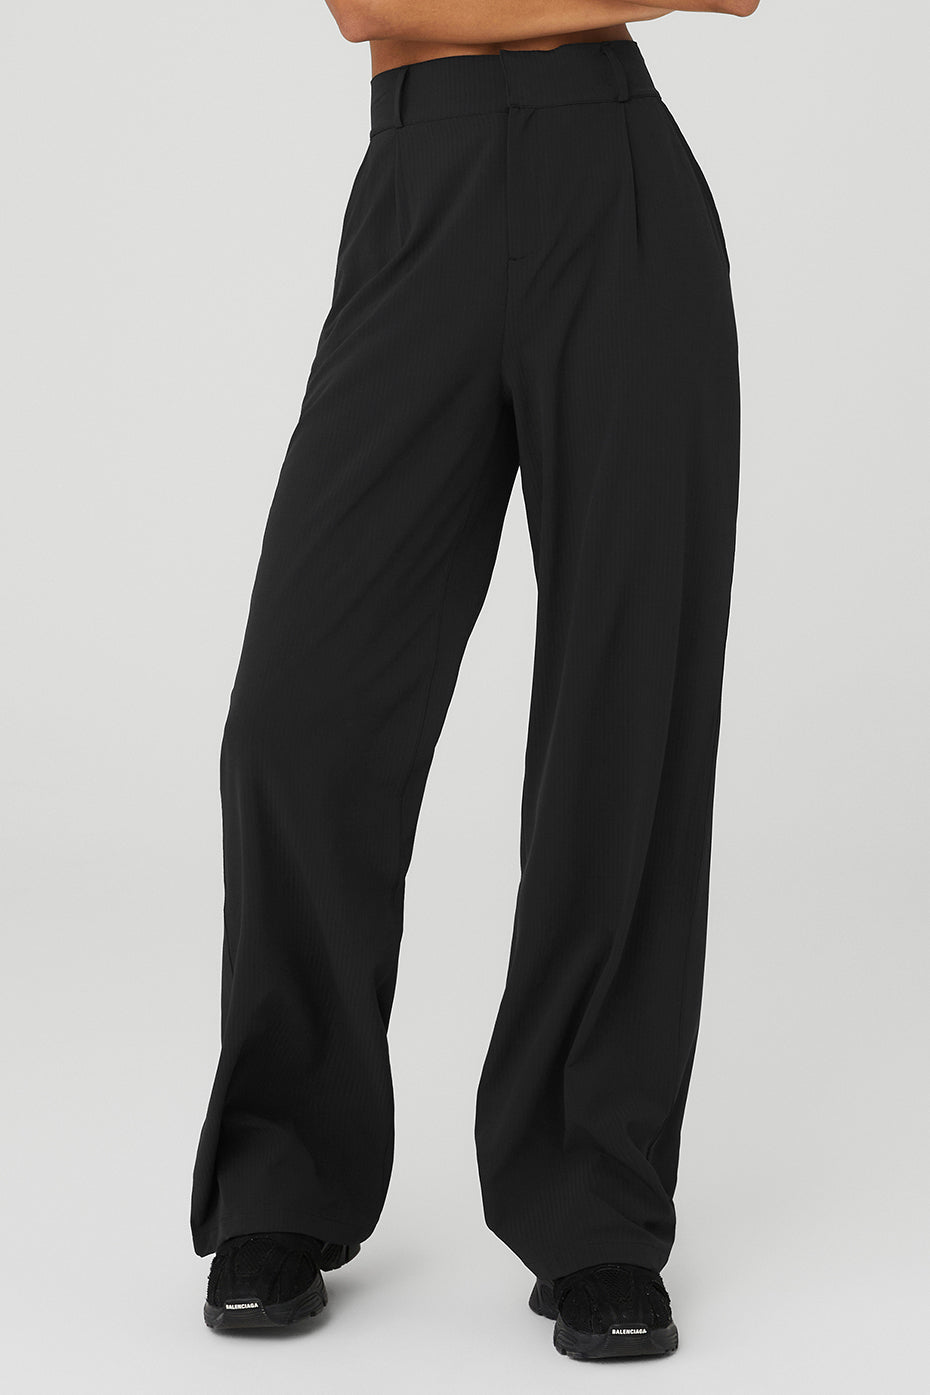 Alo Yoga ALO High Waisted City Wise Cargo Pant Size M - $72 - From Amberlynn